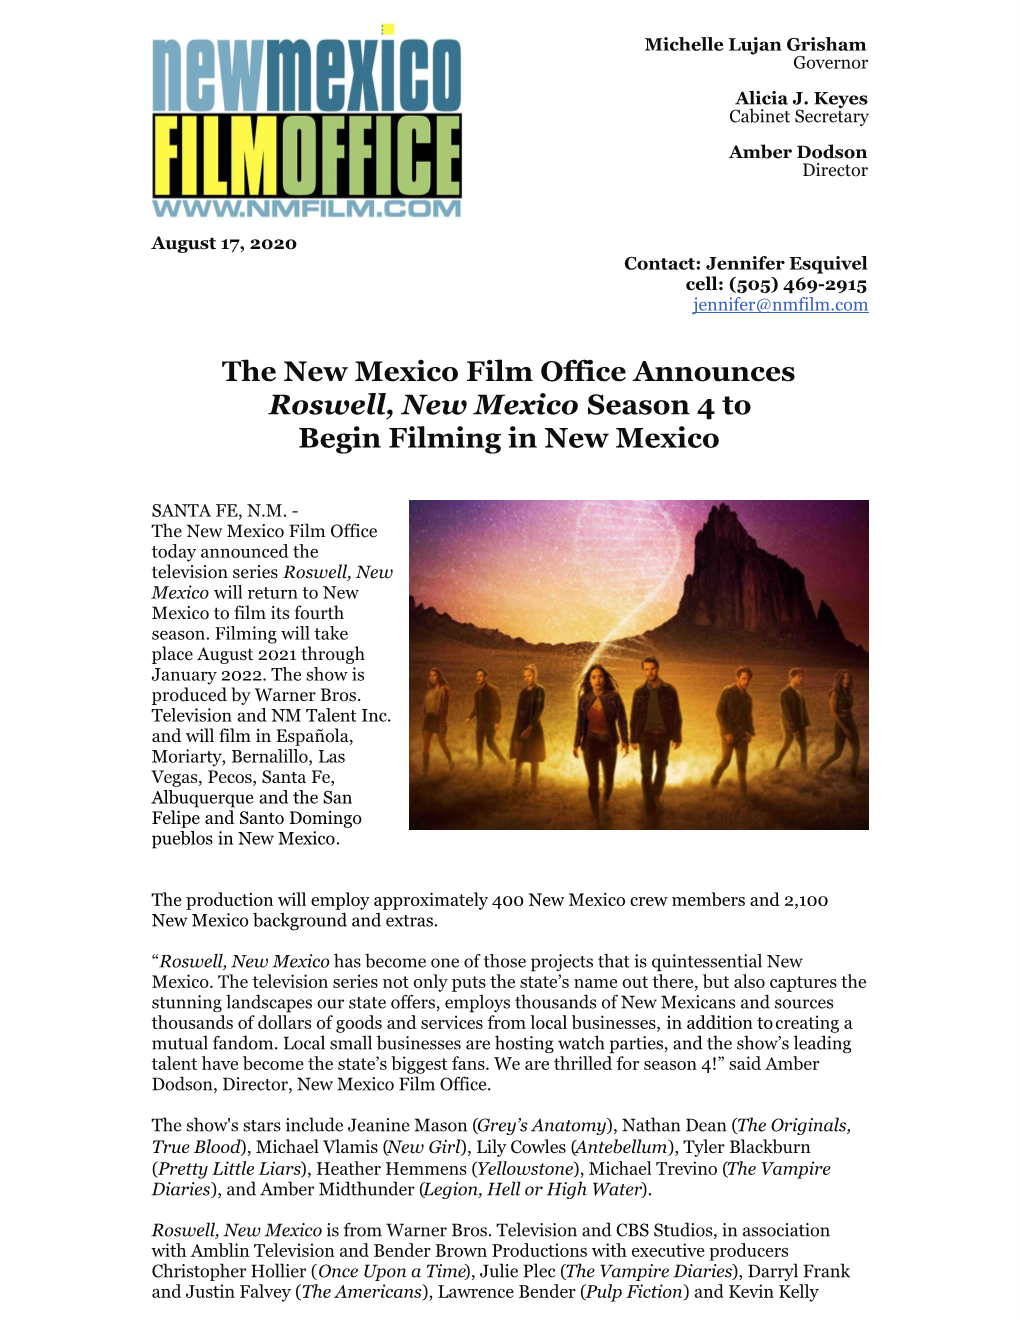 The New Mexico Film Office Announces Roswell, New Mexico Season 4 to Begin Filming in New Mexico